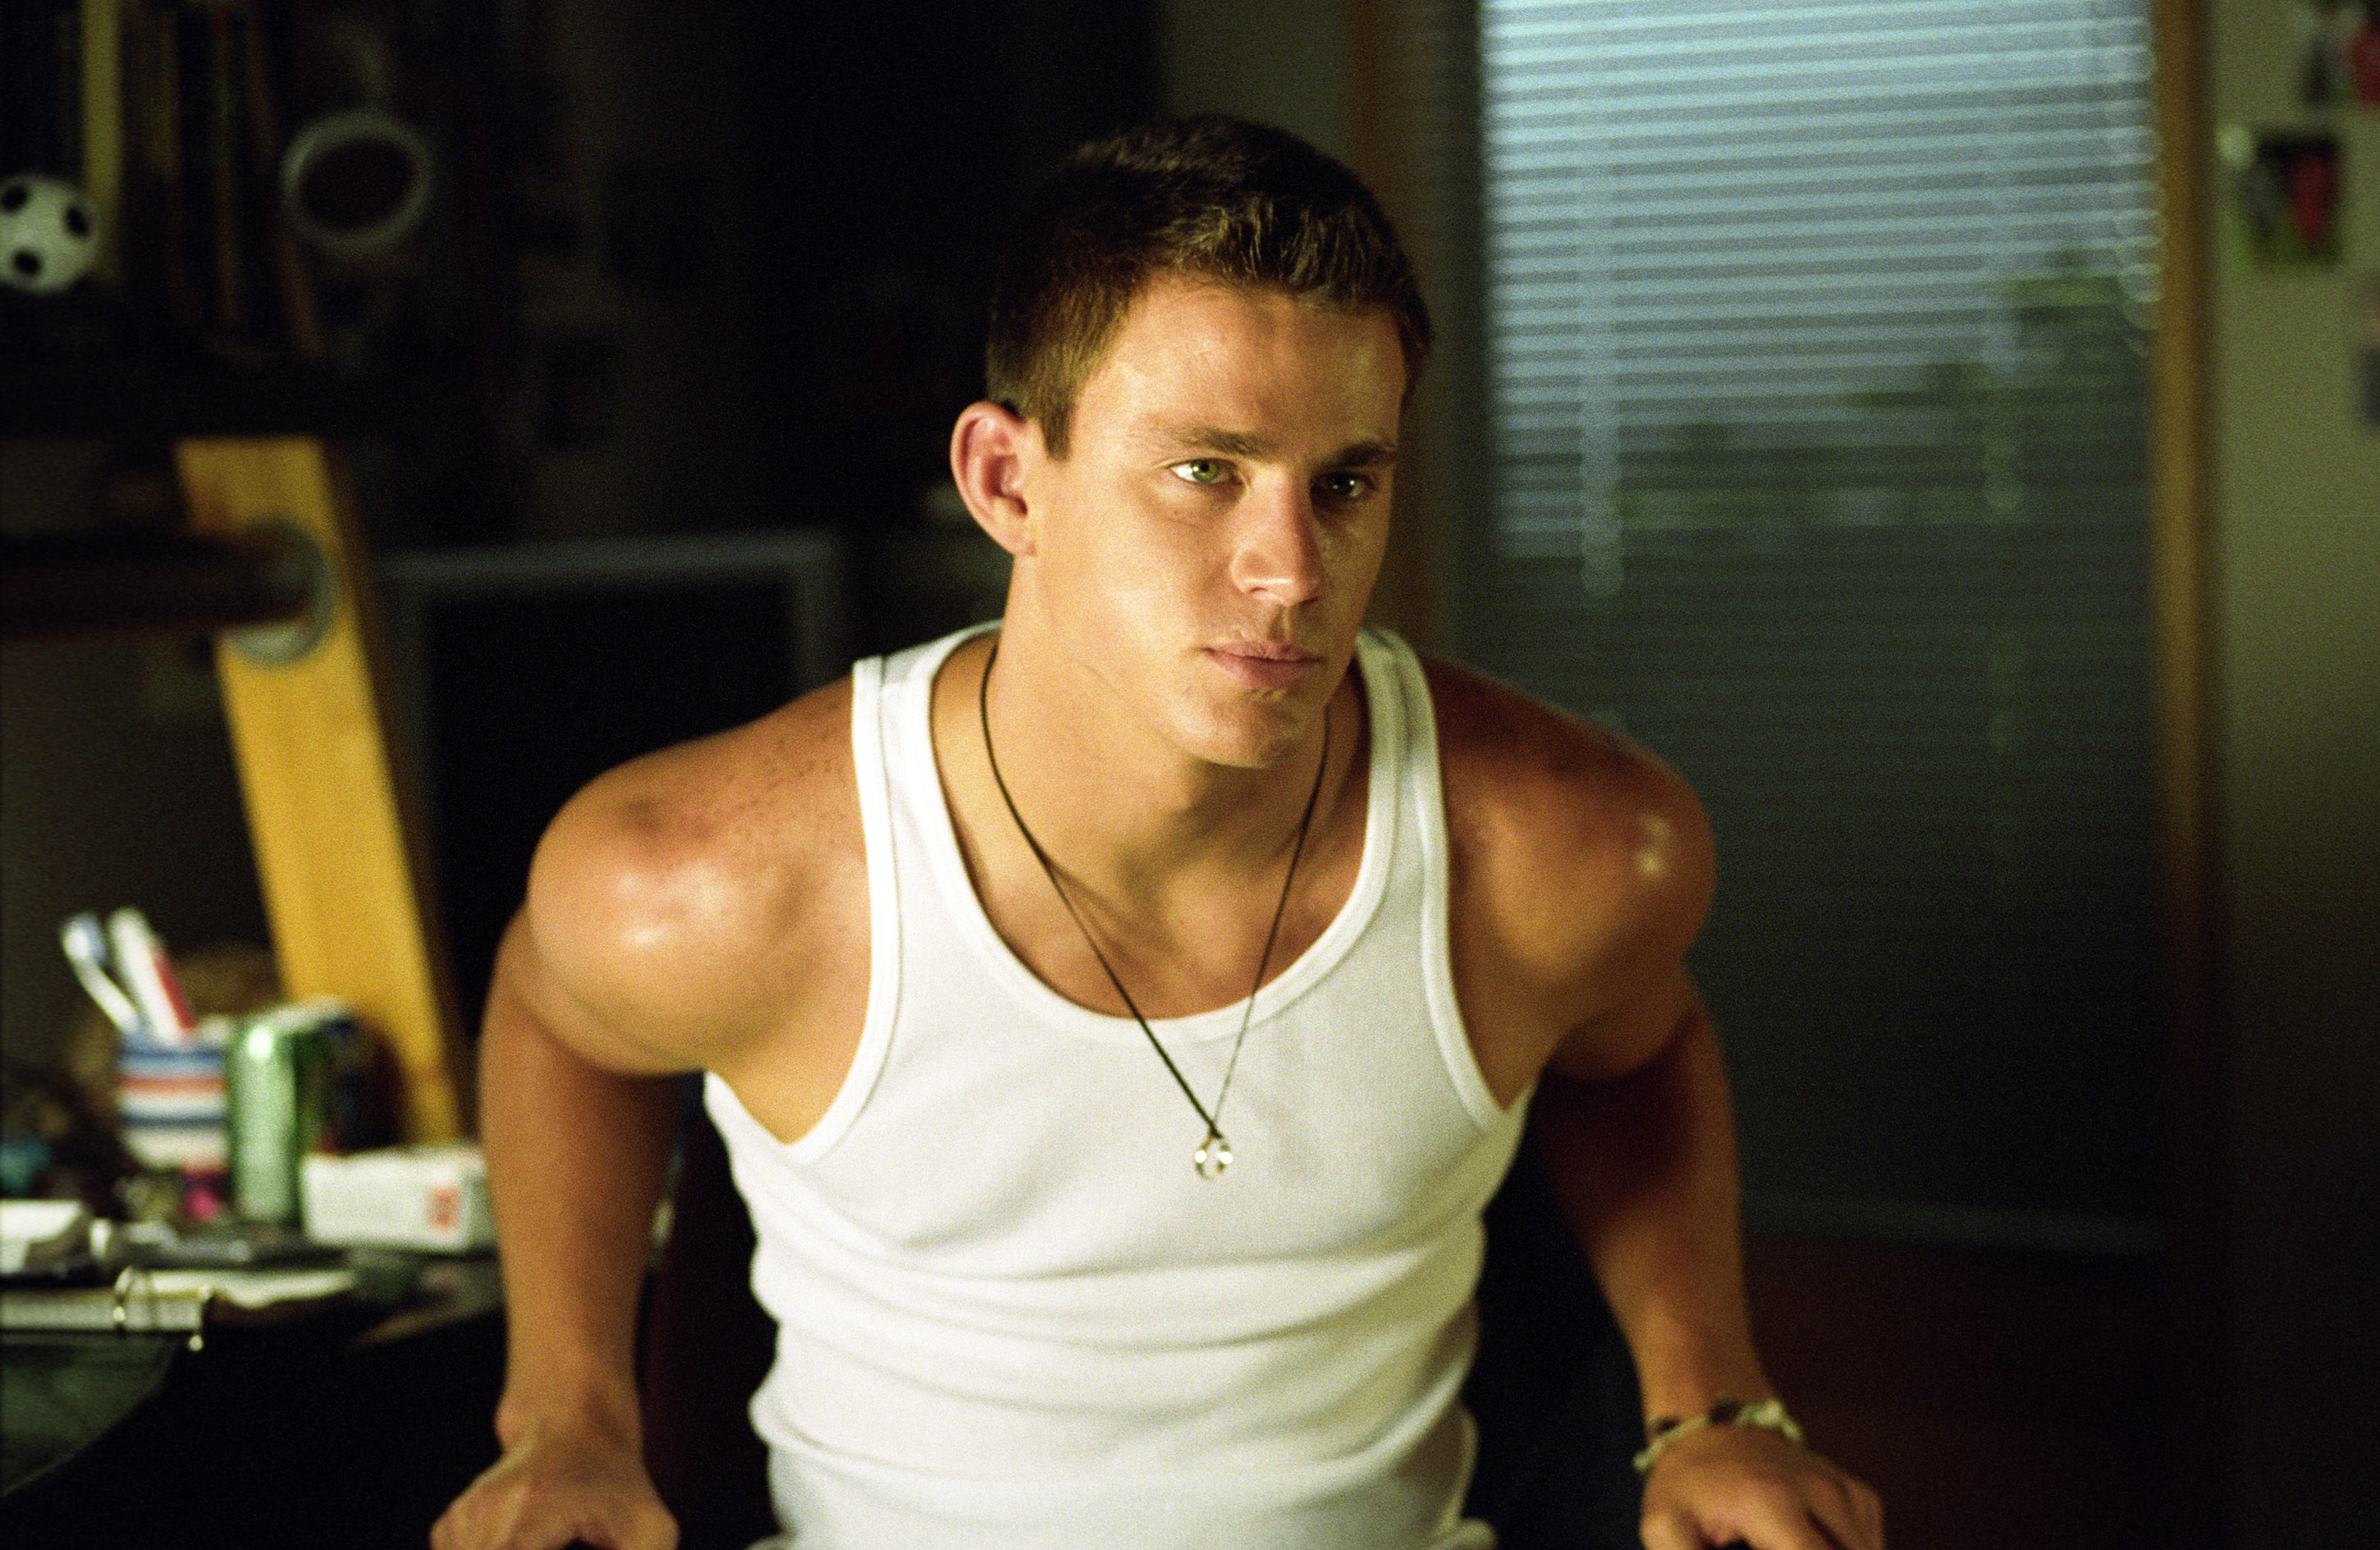 Channing in an undershirt